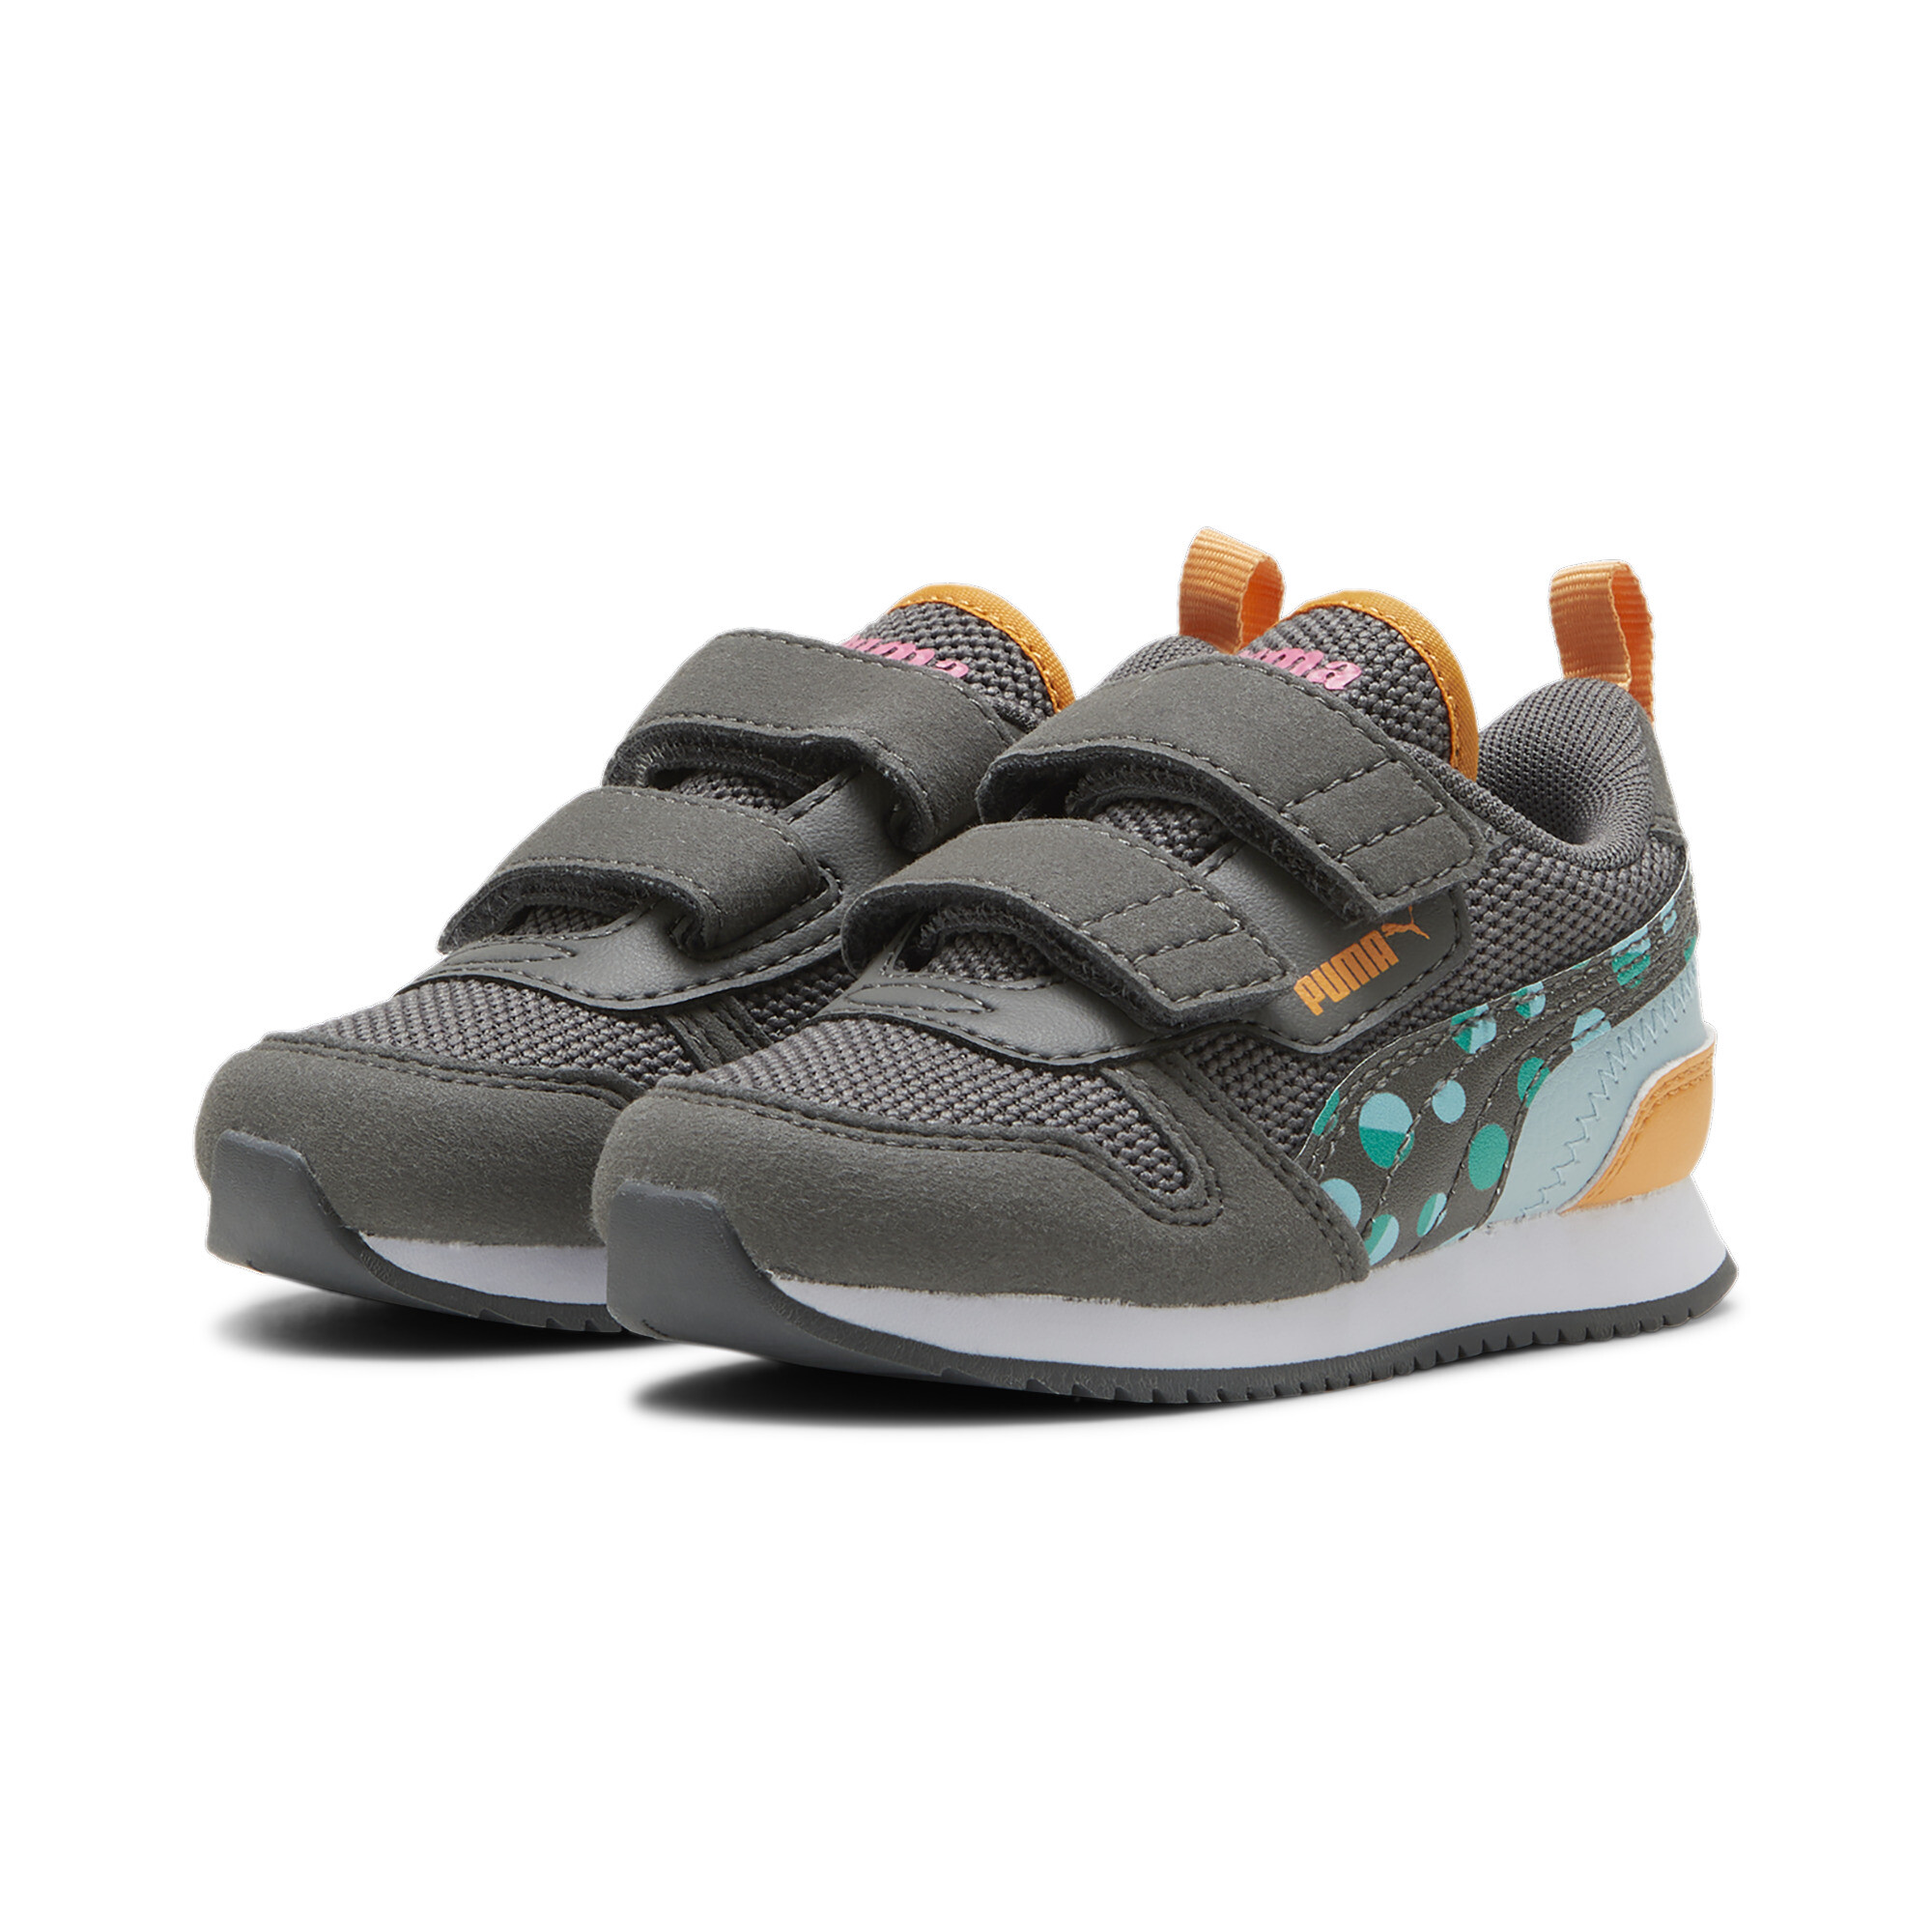 Puma R78 Summer Camp Toddlers' Sneakers, Gray, Size 24, Shoes